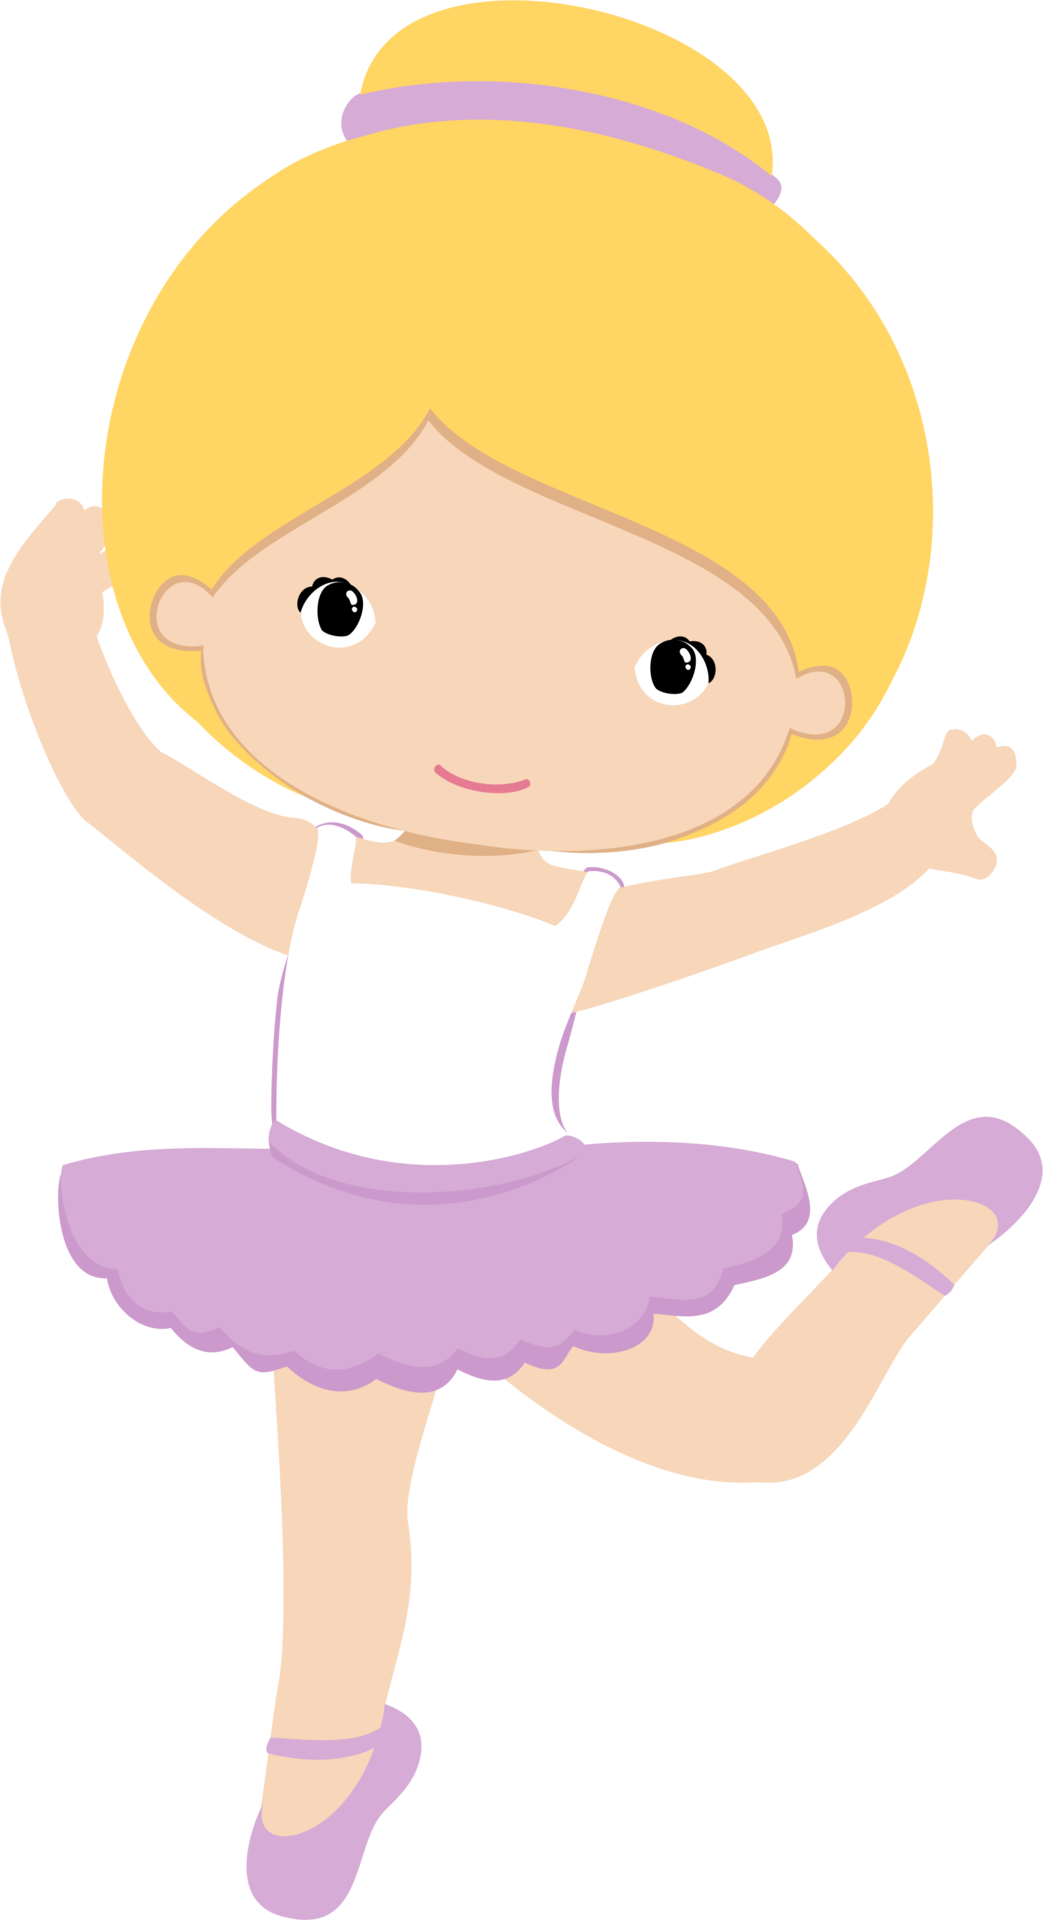 Dancer clipart baby. Pin by marina on